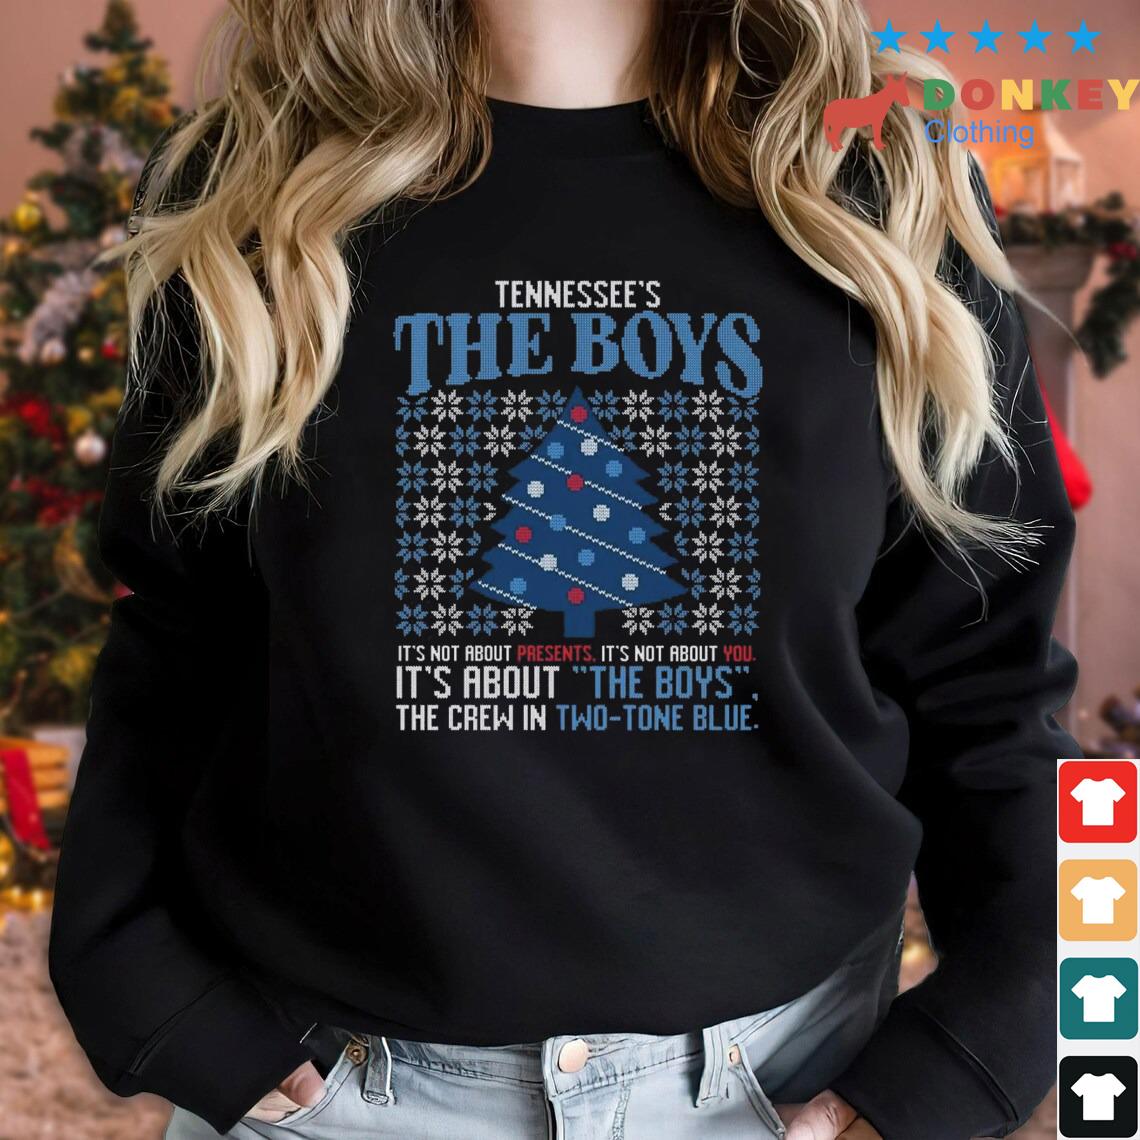 Tennessee's Titans The Boys It's About The Boys The Crew Two-Tone Blue Christmas Sweater